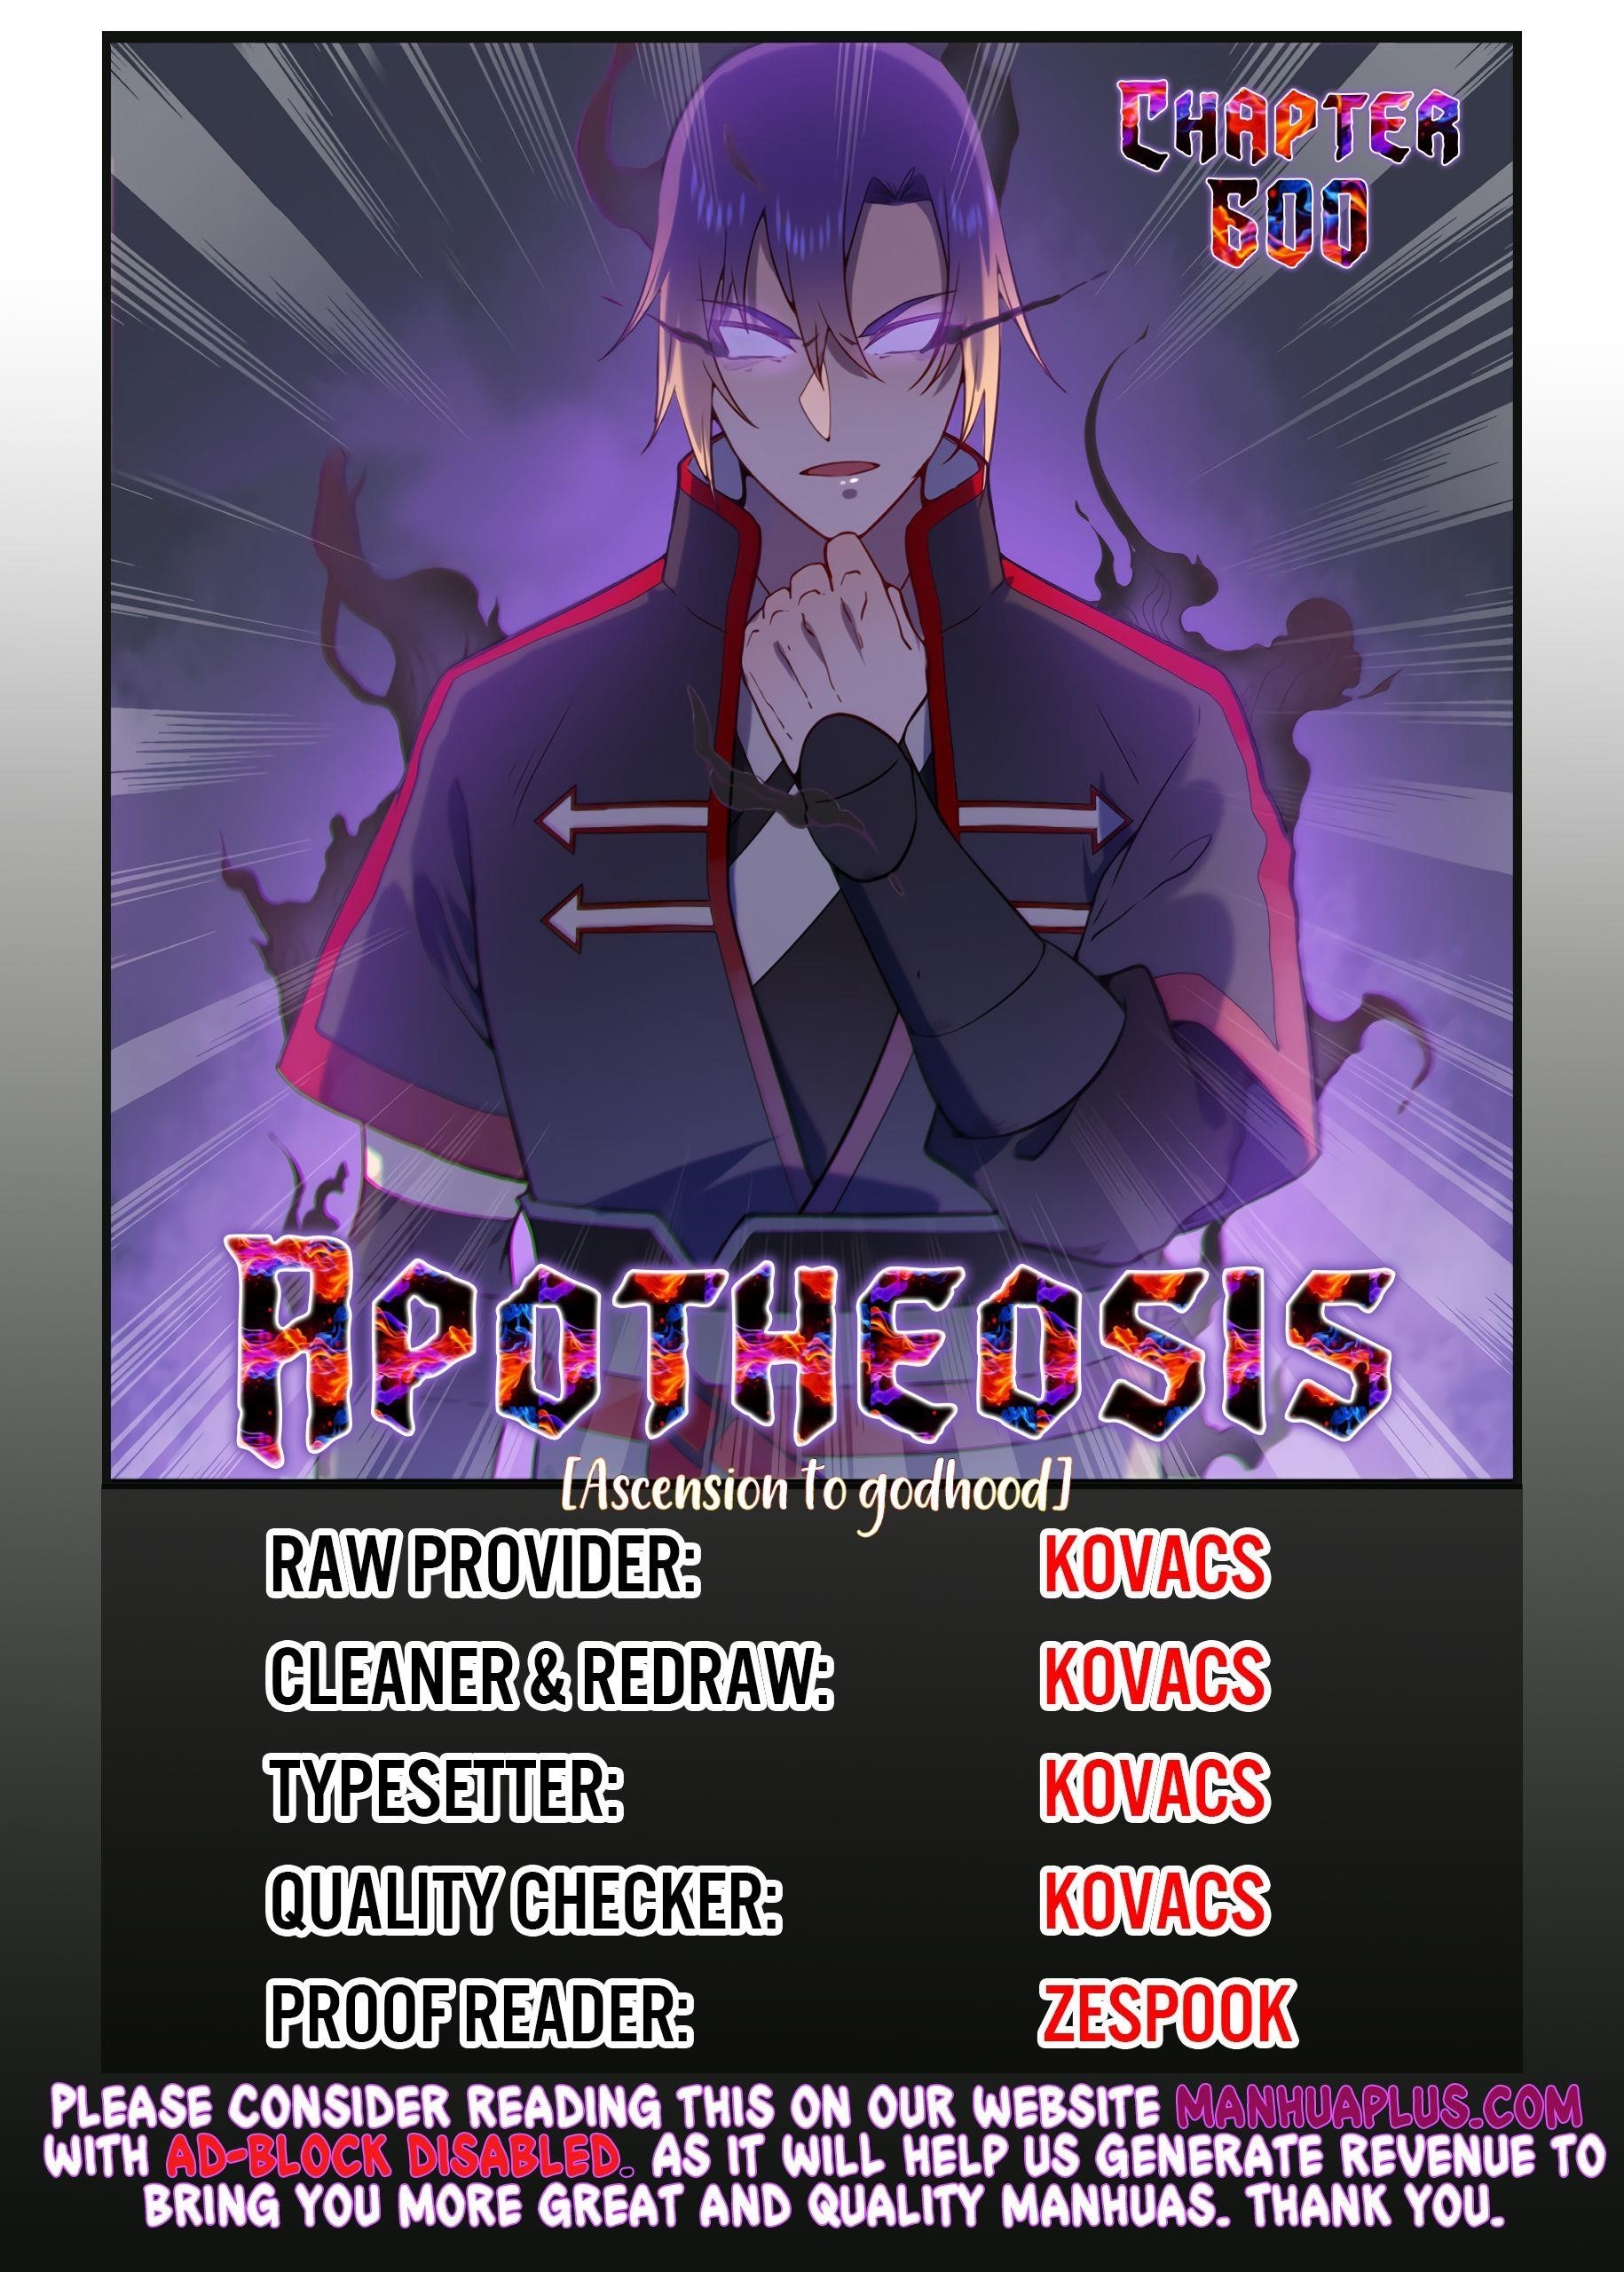 APOTHEOSIS Chapter 600 - Page 1